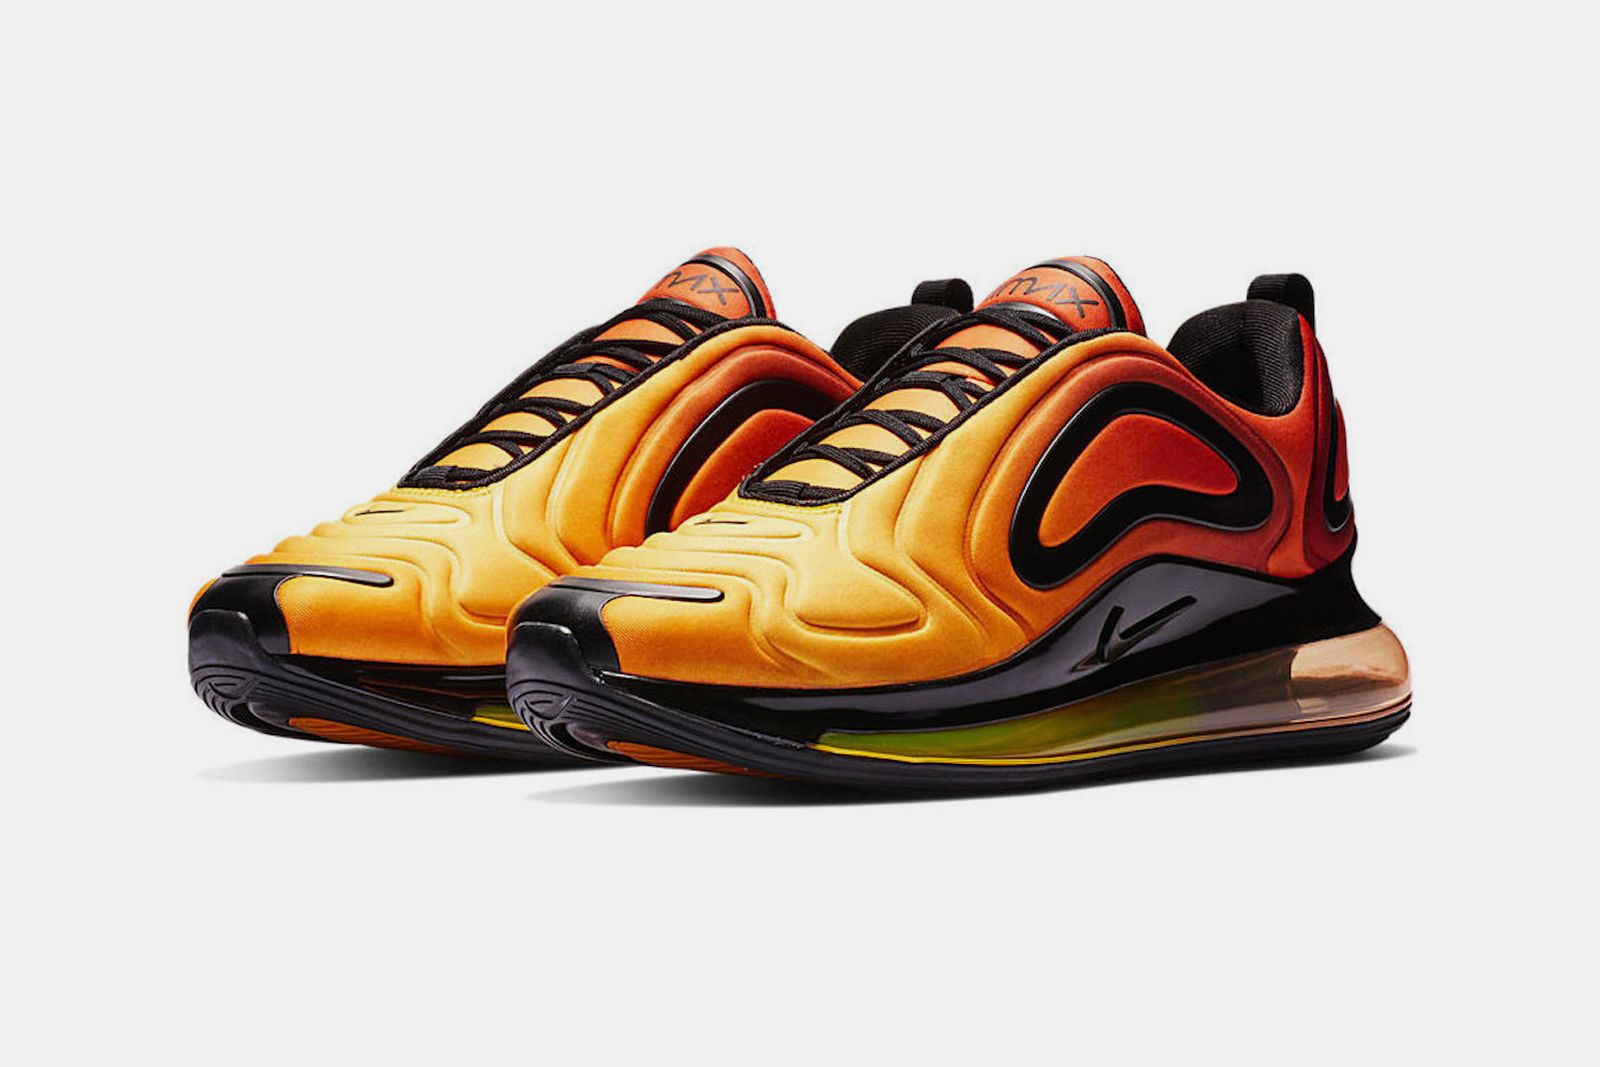 Beperking Twisted Veraangenamen Here's How to Cop Nike's Air Max 720 at Its Private Members Store